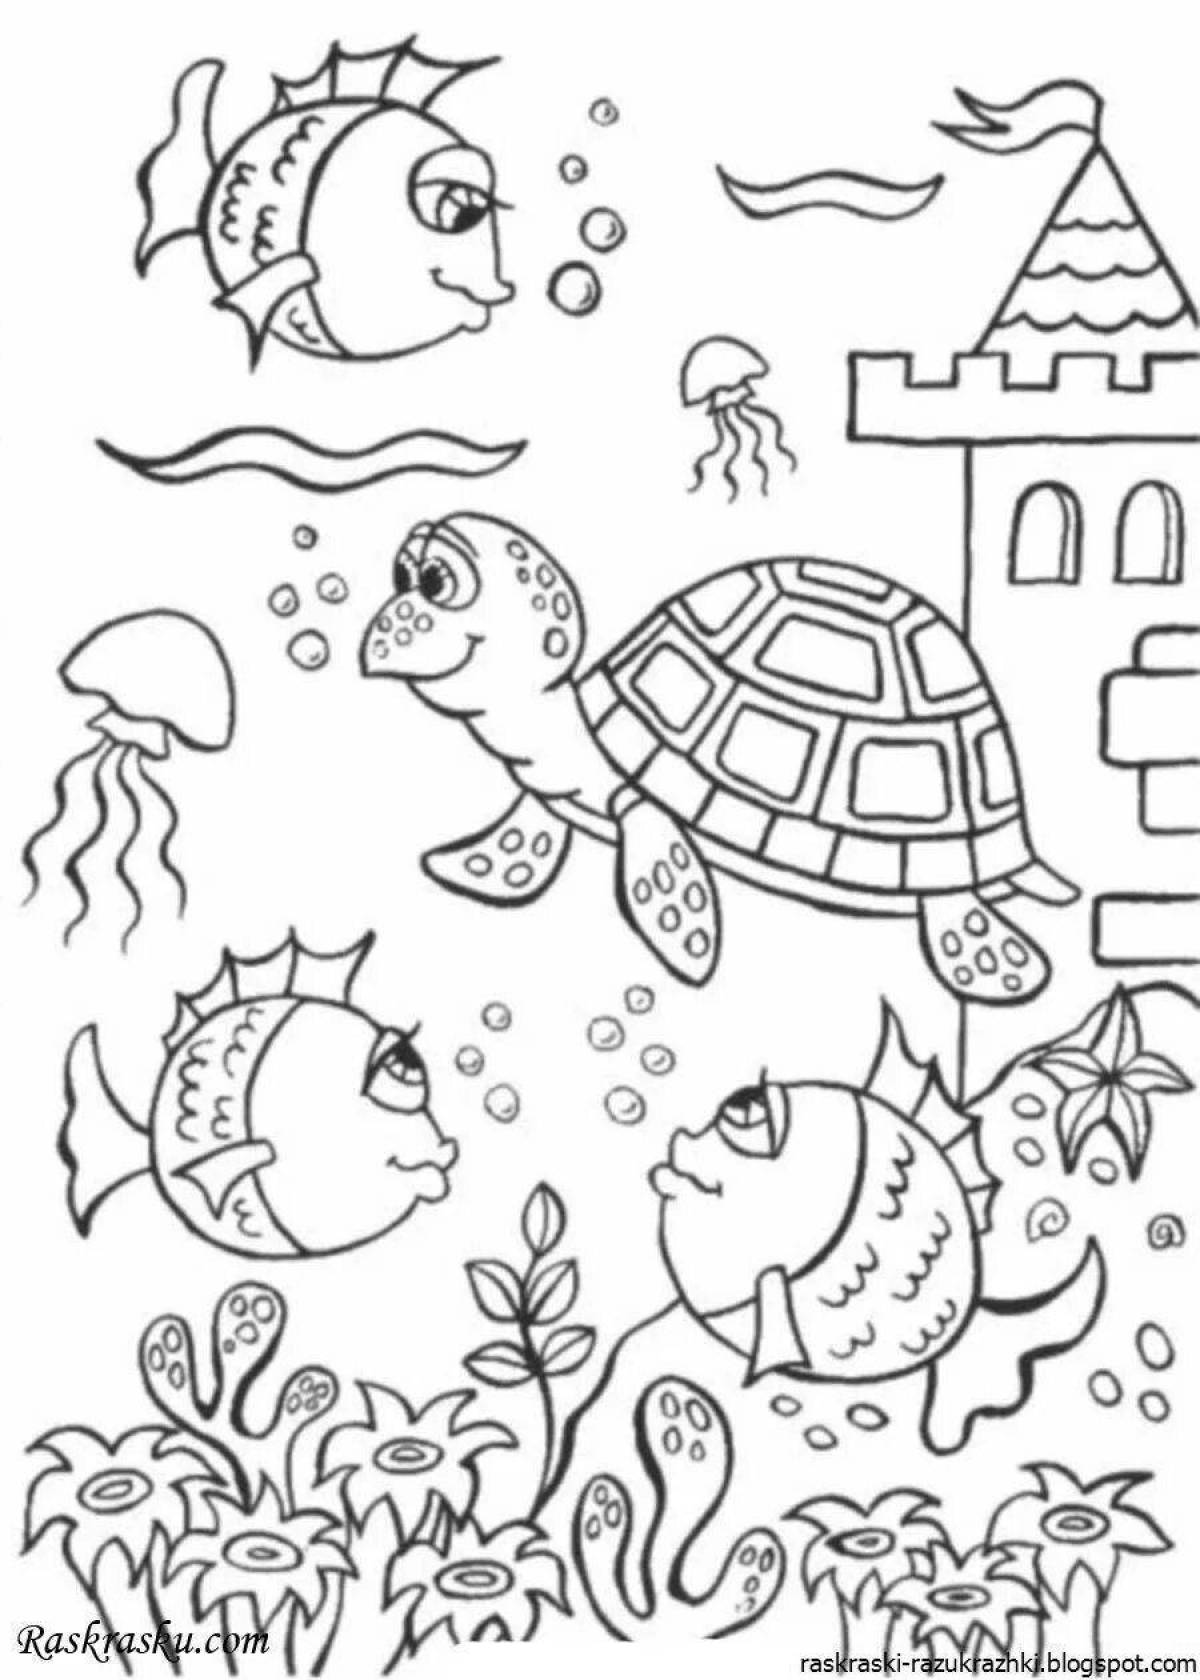 Coloring book exquisite water children's world